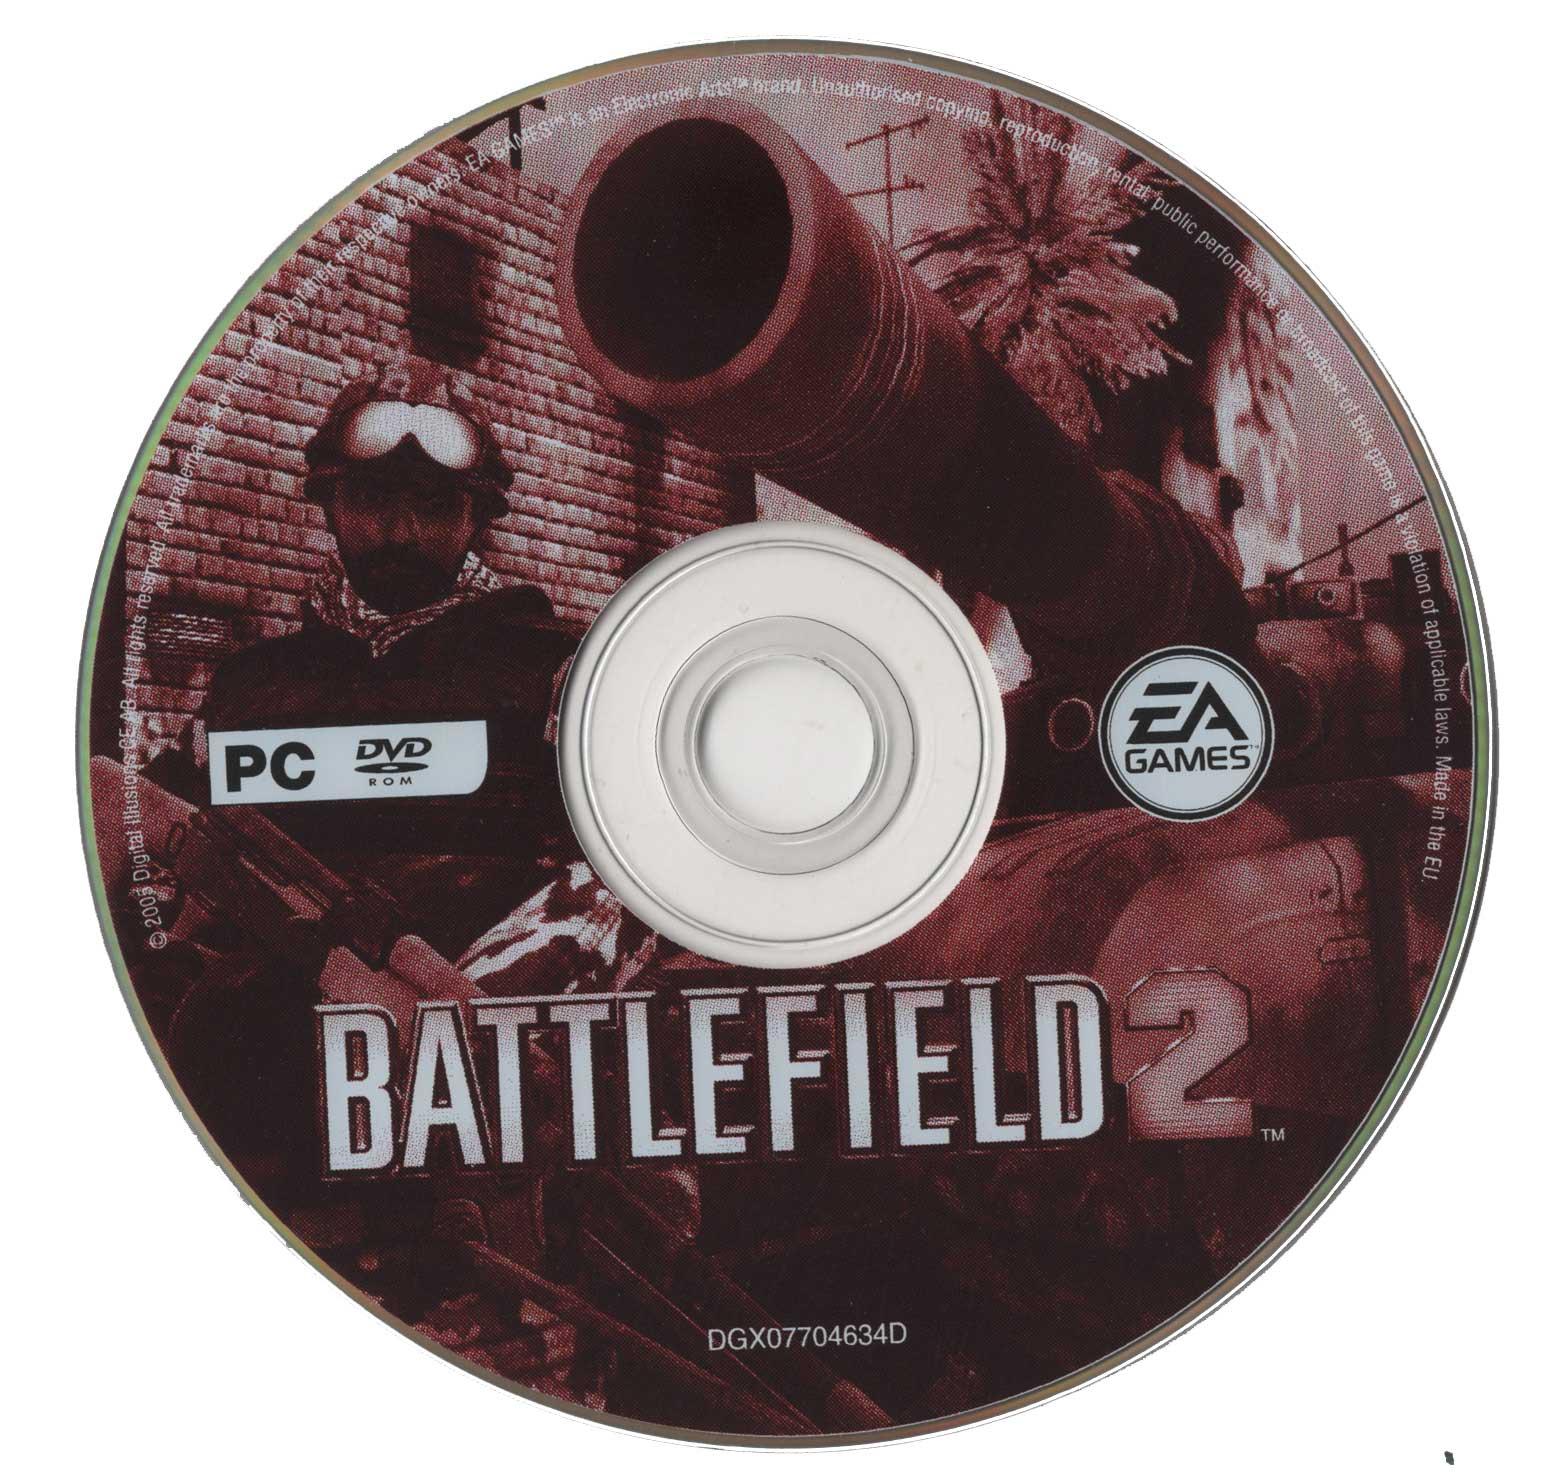 Complete Battlefield Collection - Classic Windows PC Game